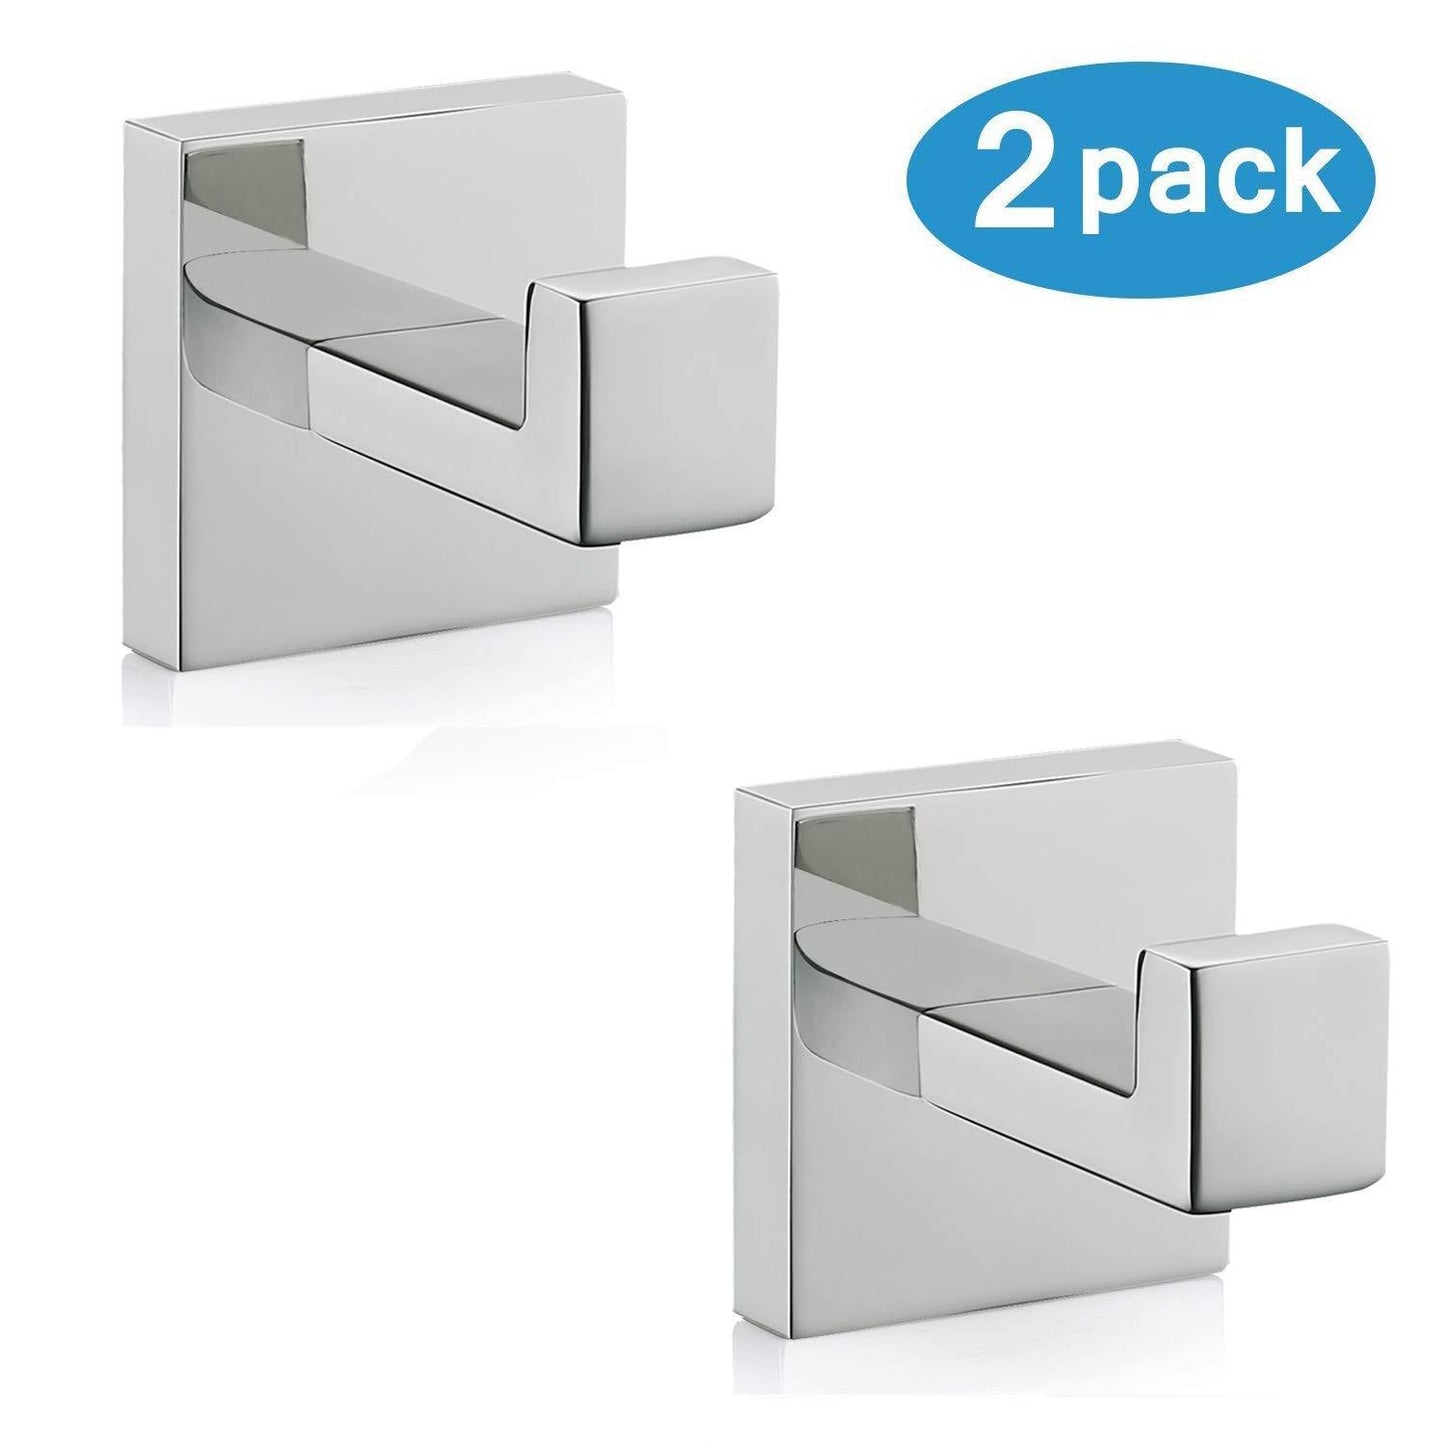 Top rated nolimas bath towel hook sus 304 stainless steel square clothes towel coat robe hook cabinet closet door sponges hanger for bath kitchen garage heavy duty wall mounted chrome polished finish 2pack